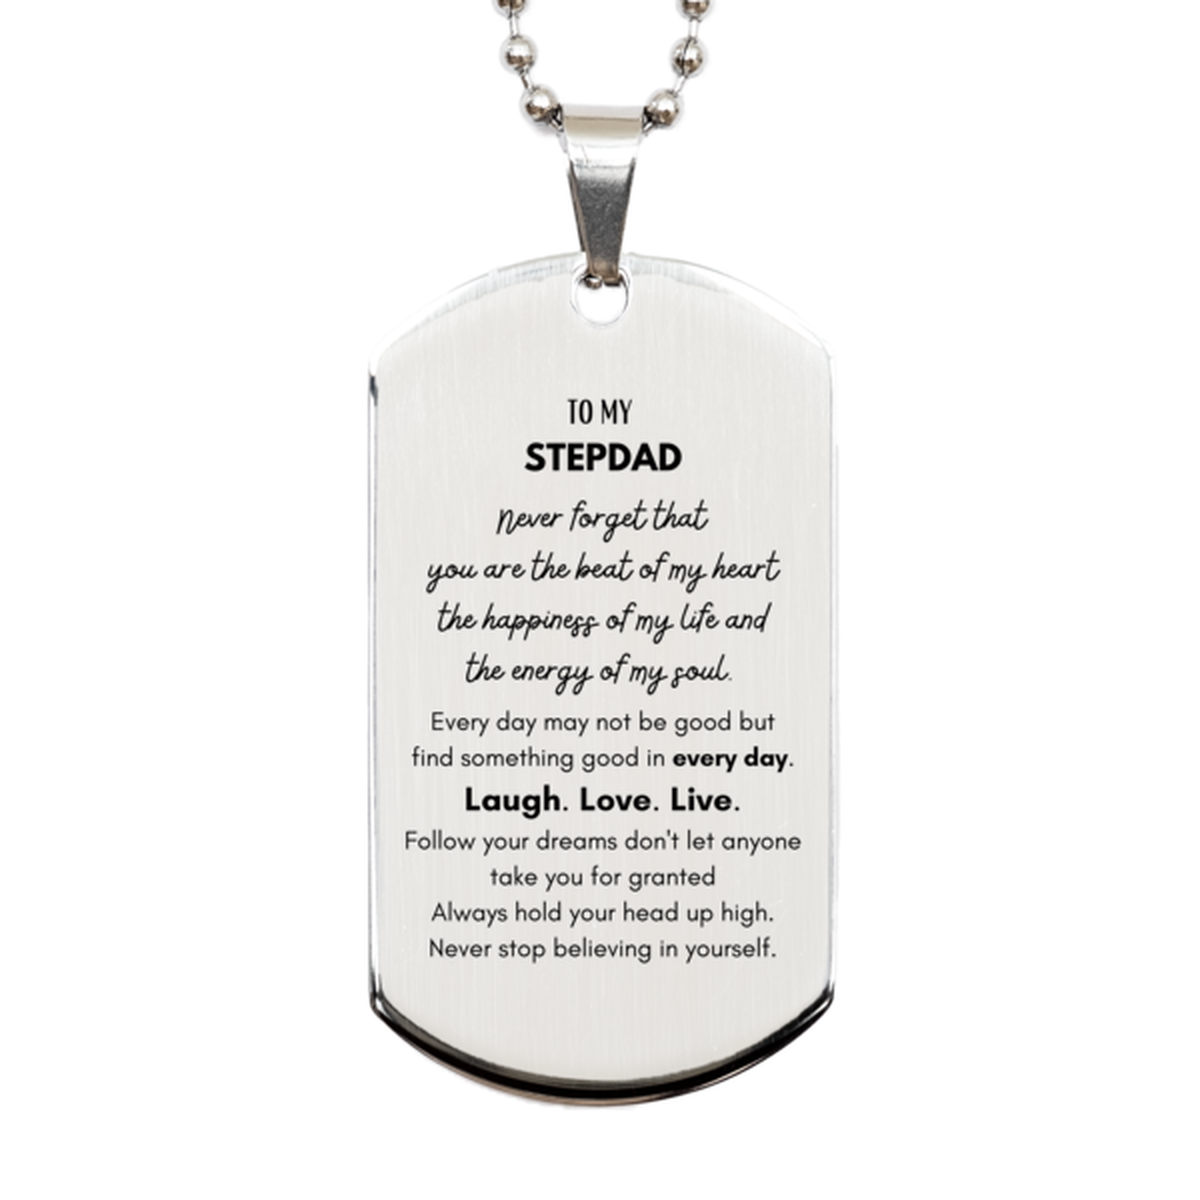 To My Stepdad Dogtag Gifts, Christmas Stepdad Silver Dog Tag Present, Birthday Unique Motivational For Stepdad, To My Stepdad Never forget that you are the beat of my heart the happiness of my life and the energy of my soul